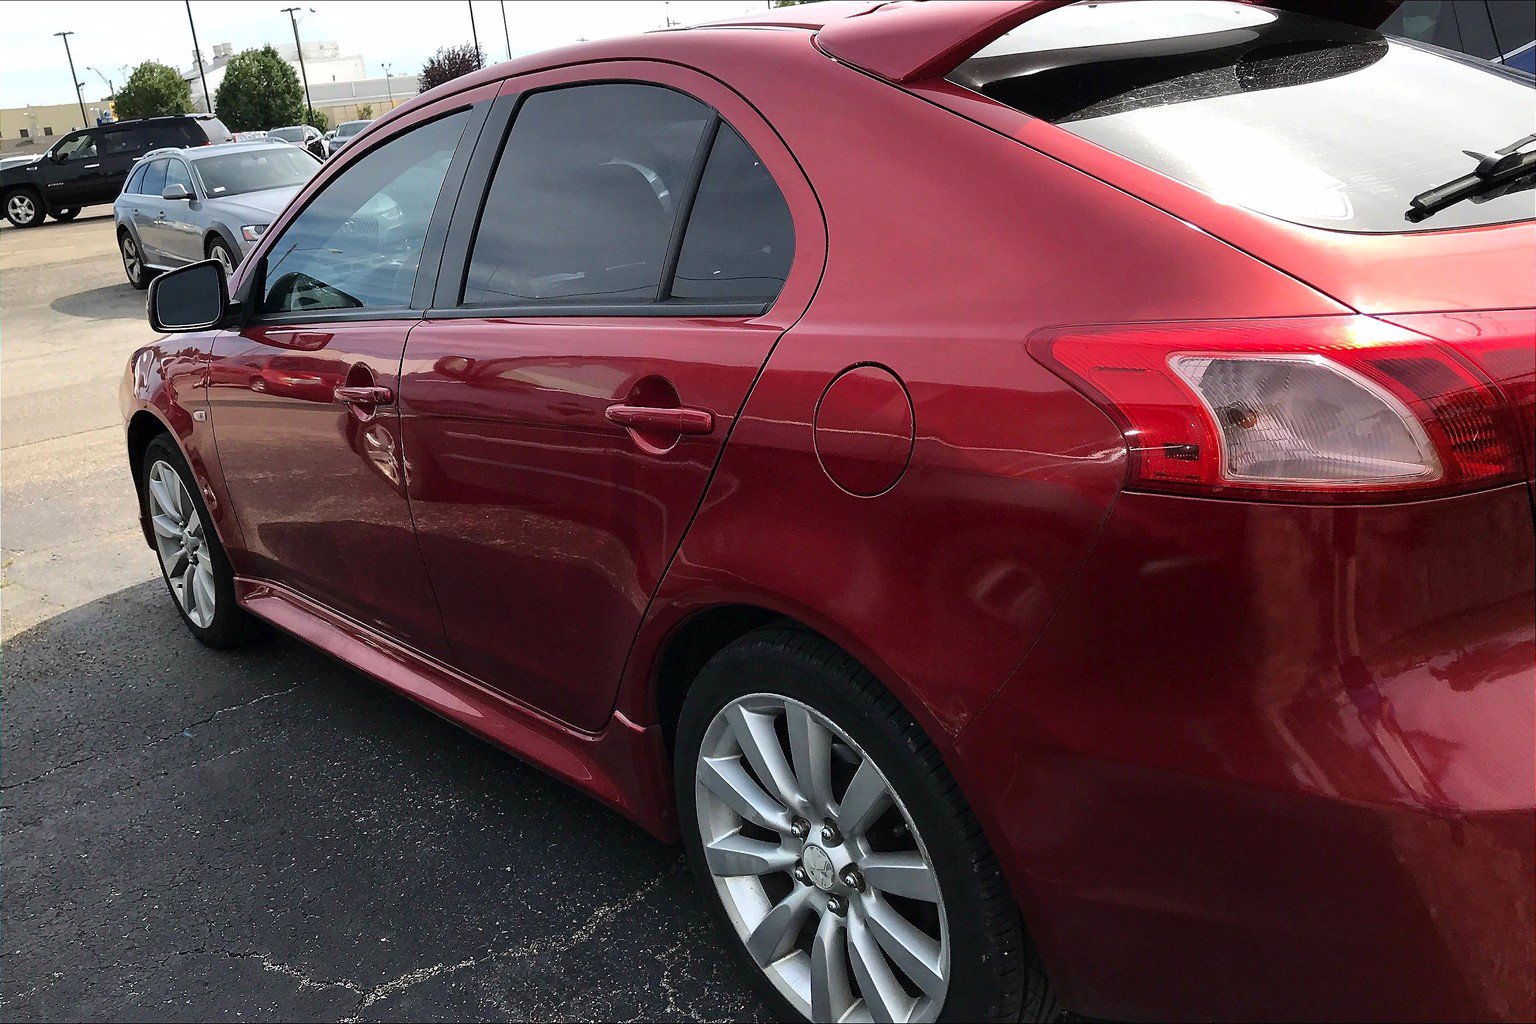 PreOwned 2011 Mitsubishi Lancer GTS 4D Hatchback in